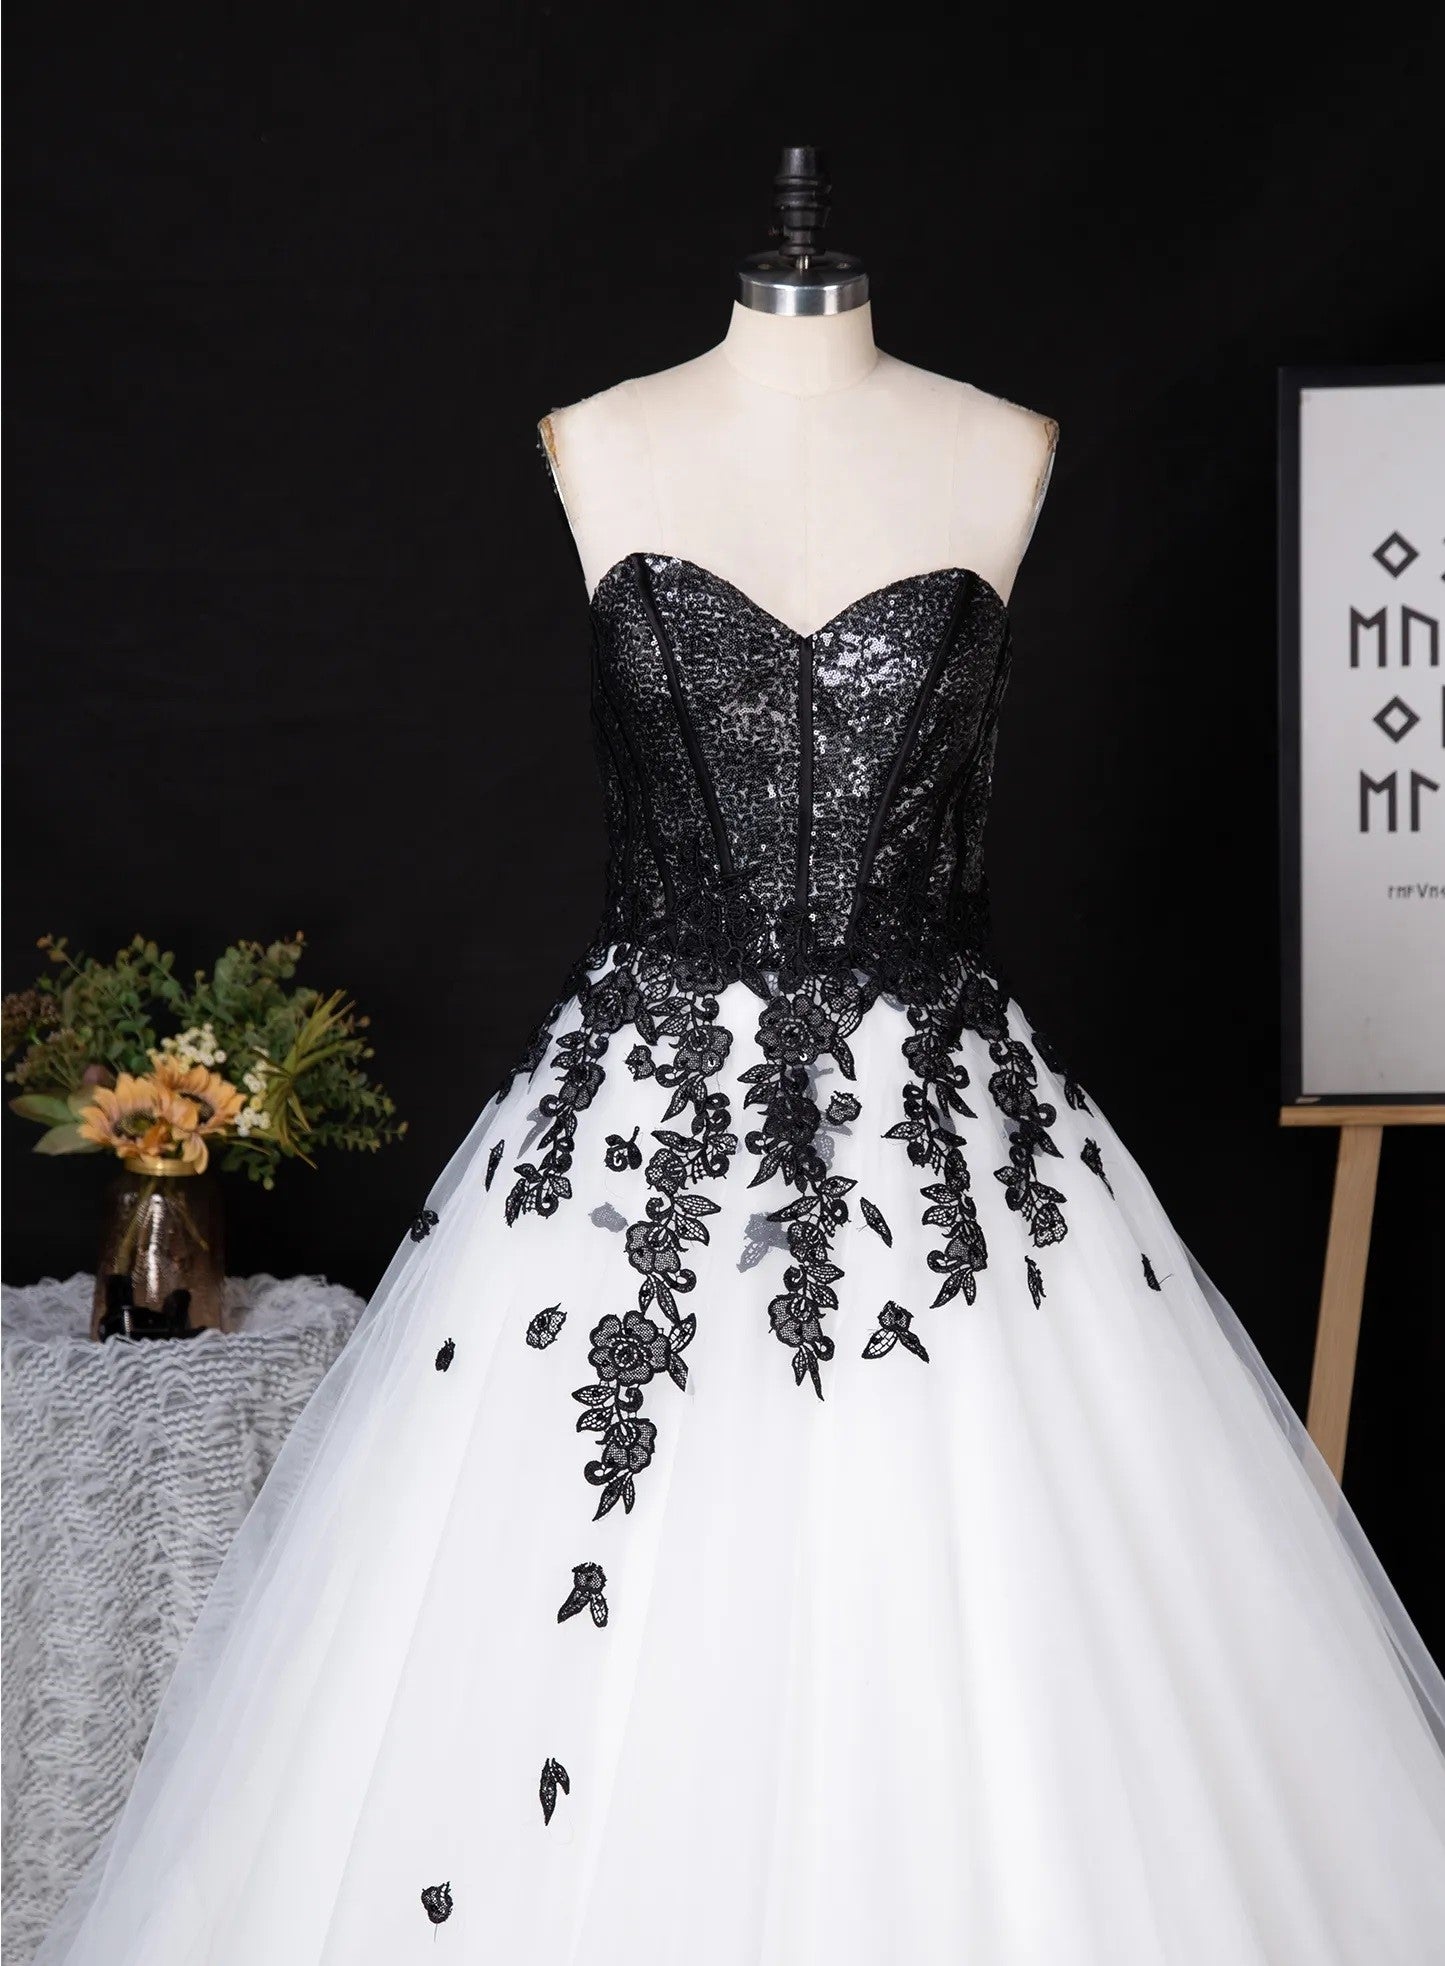 Sweetheart Sequin Ballgown With Black Floral Motifs